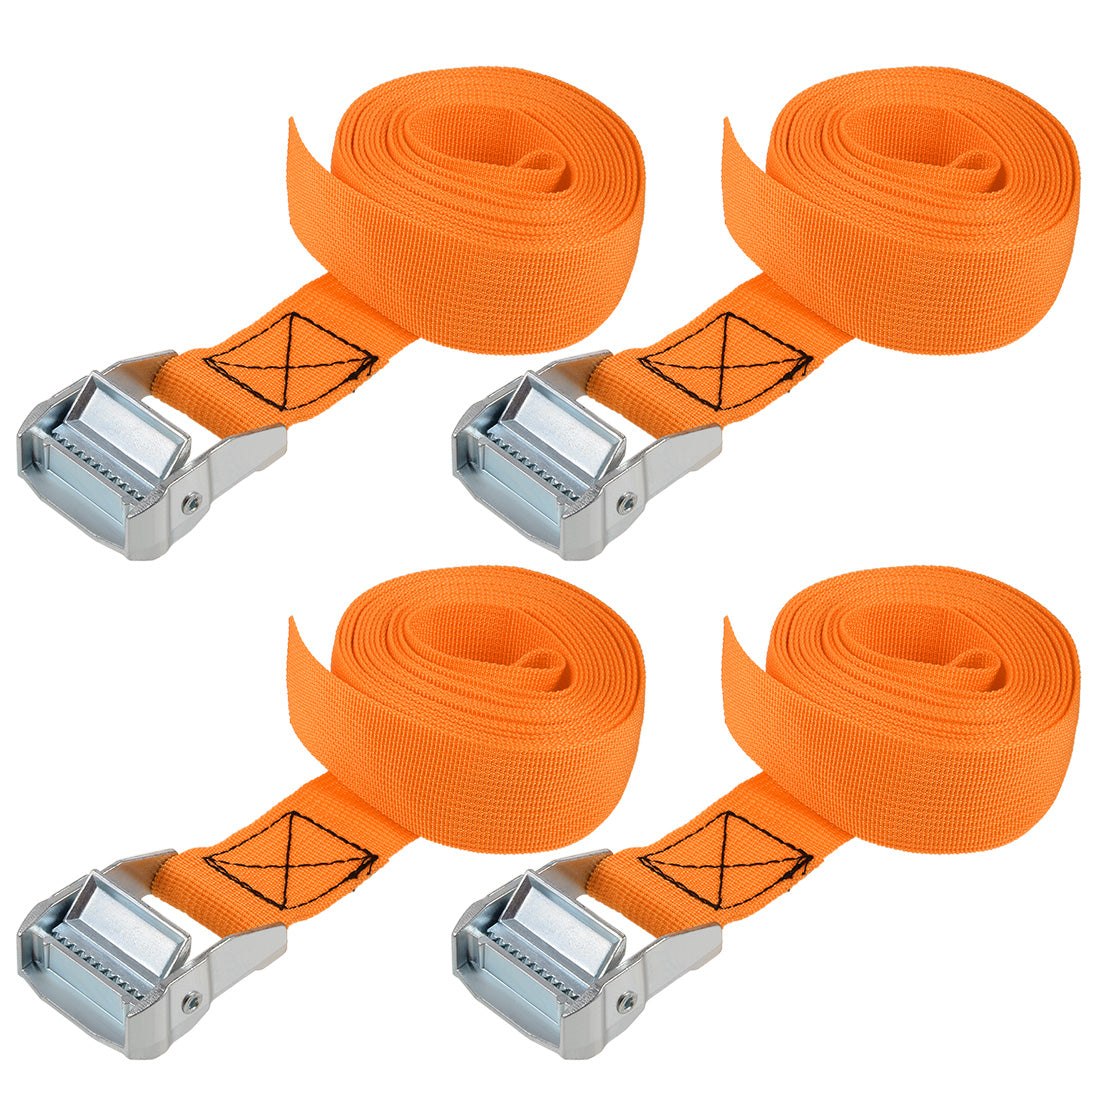 Uxcell Uxcell Lashing Strap 1.5" x 20' Cargo Tie Down Straps with Cam Lock Buckle Up to 1100lbs Orange 4Pcs